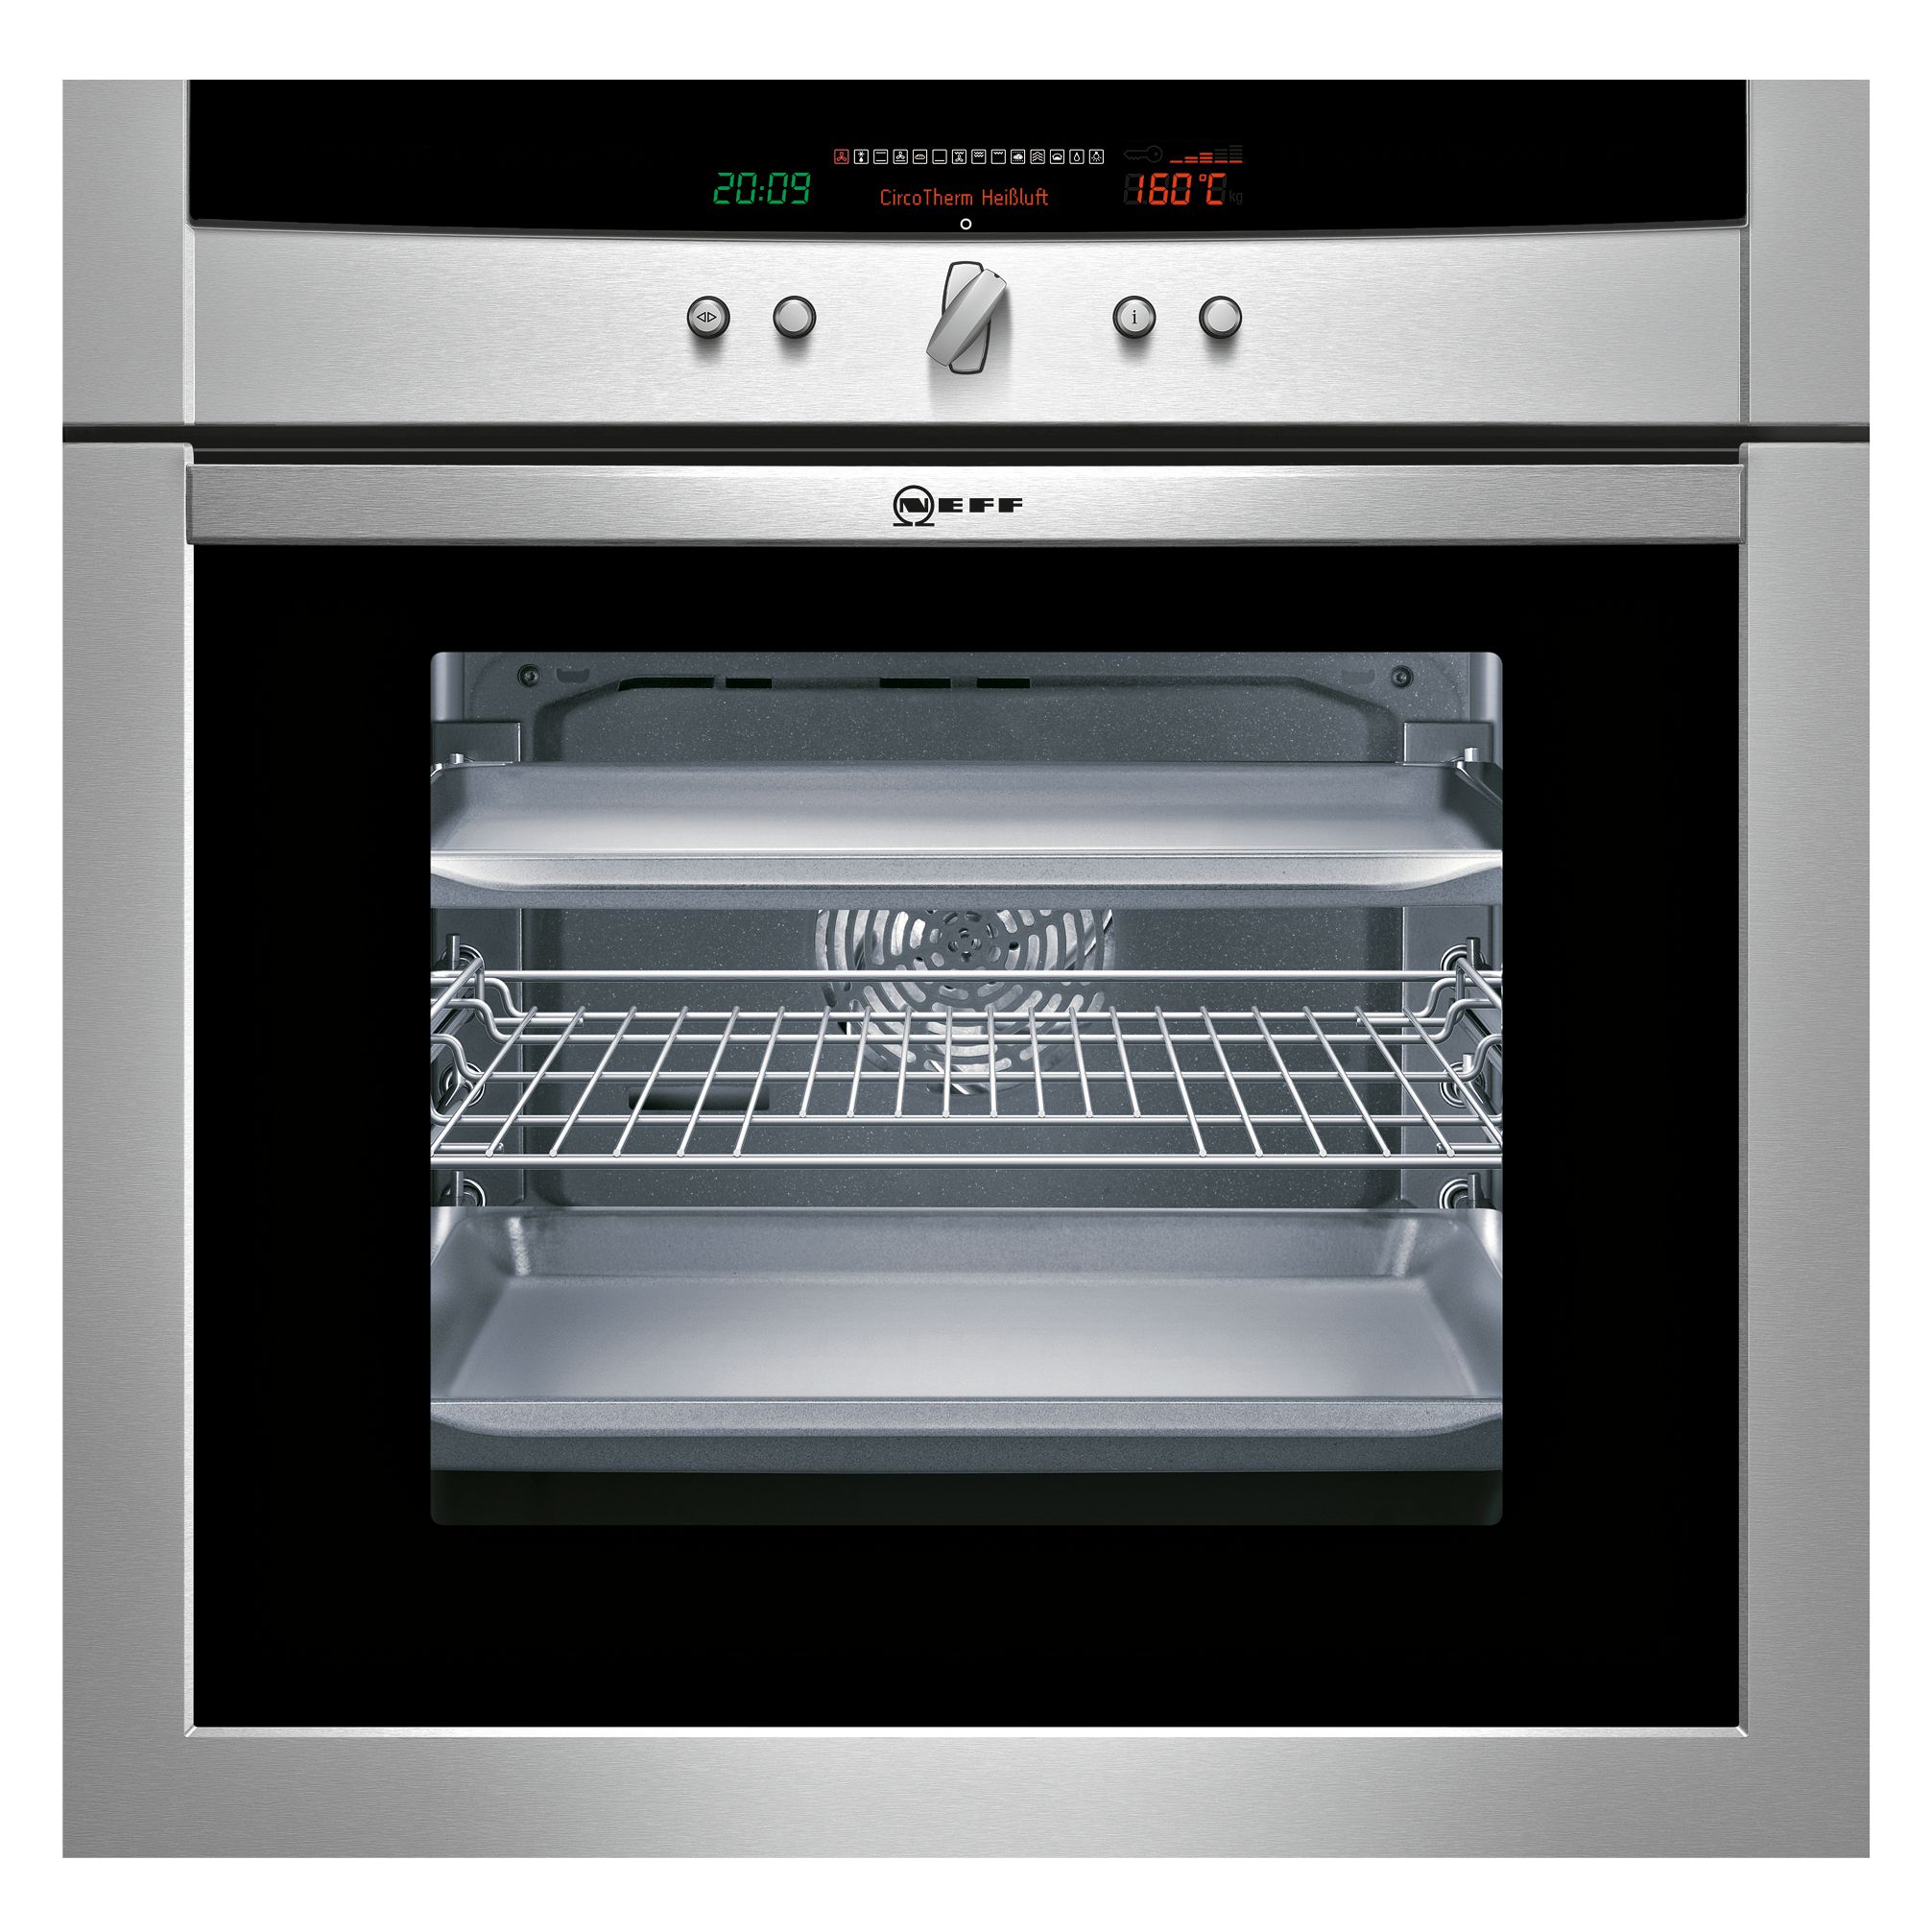 Neff B46E74N0GB Single Electric Oven, Stainless Steel at John Lewis